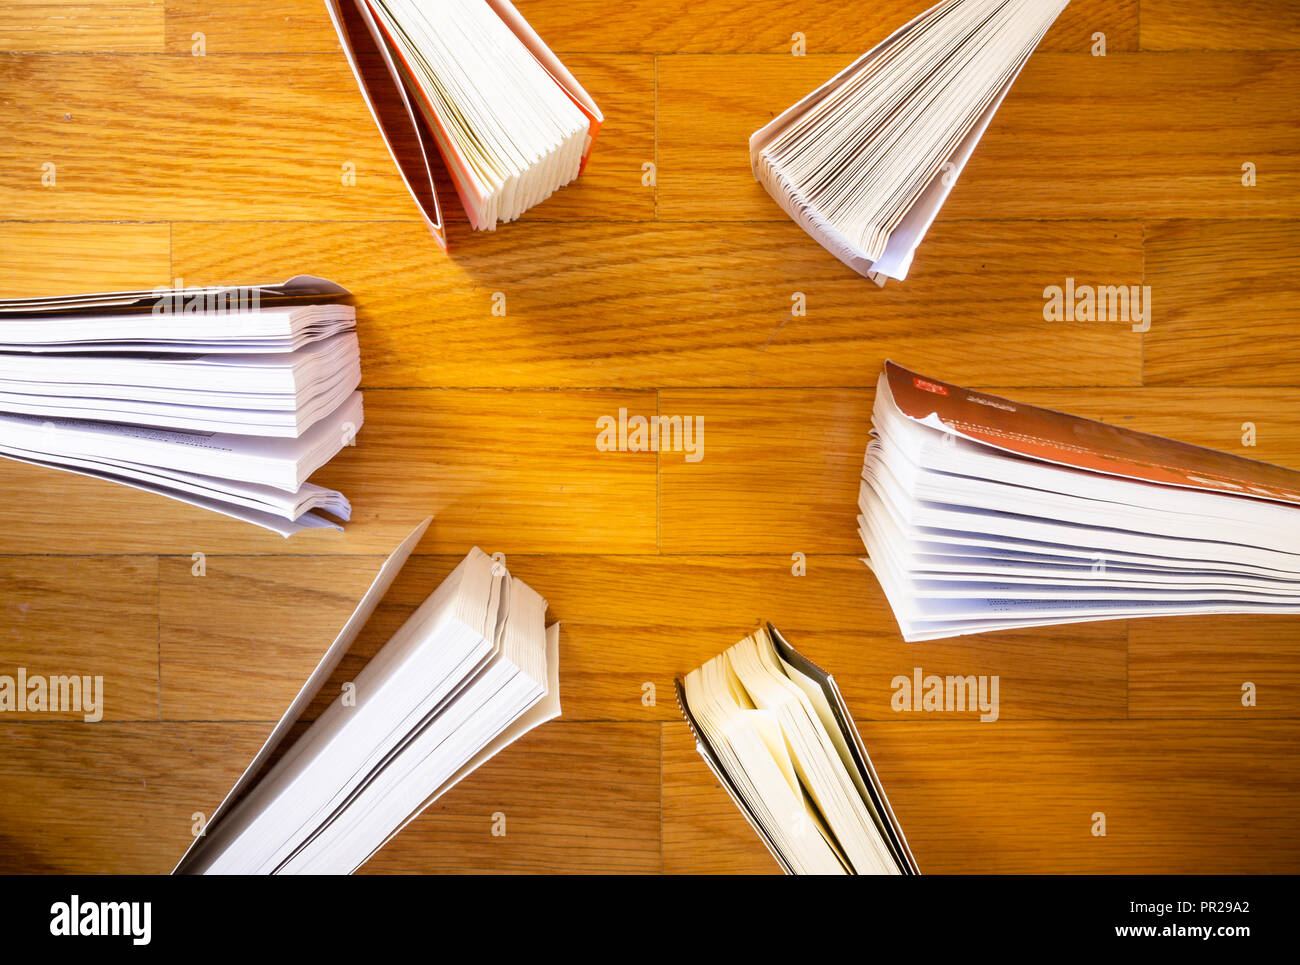 A wooden background with various books, top-view. Stock Photo